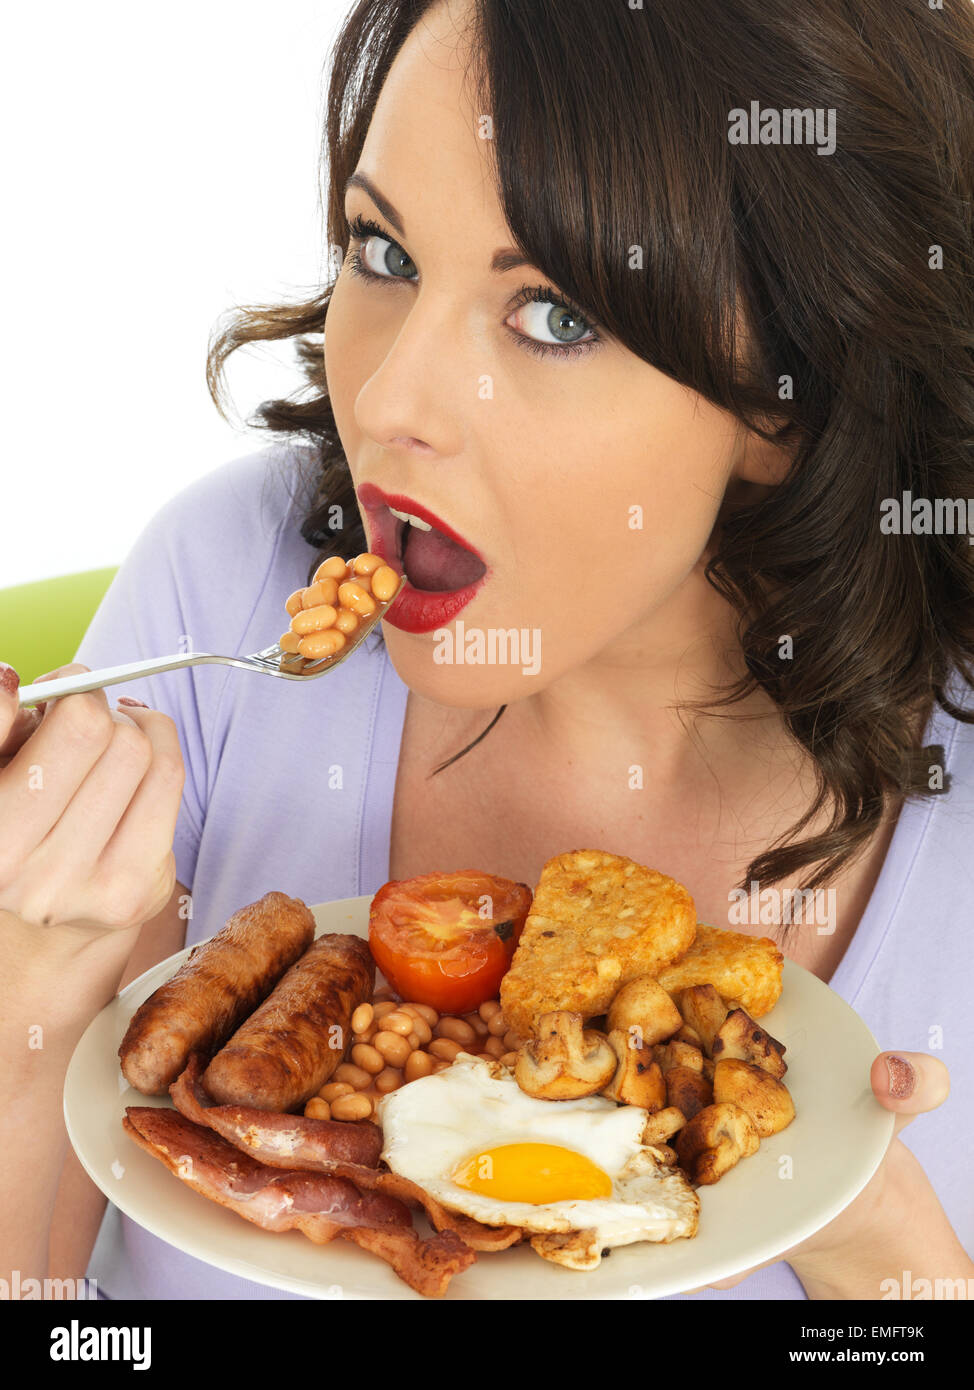 Stock Photo - Young Attractive Woman Eating a <b>Full English</b> Breakfast - young-attractive-woman-eating-a-full-english-breakfast-EMFT9K